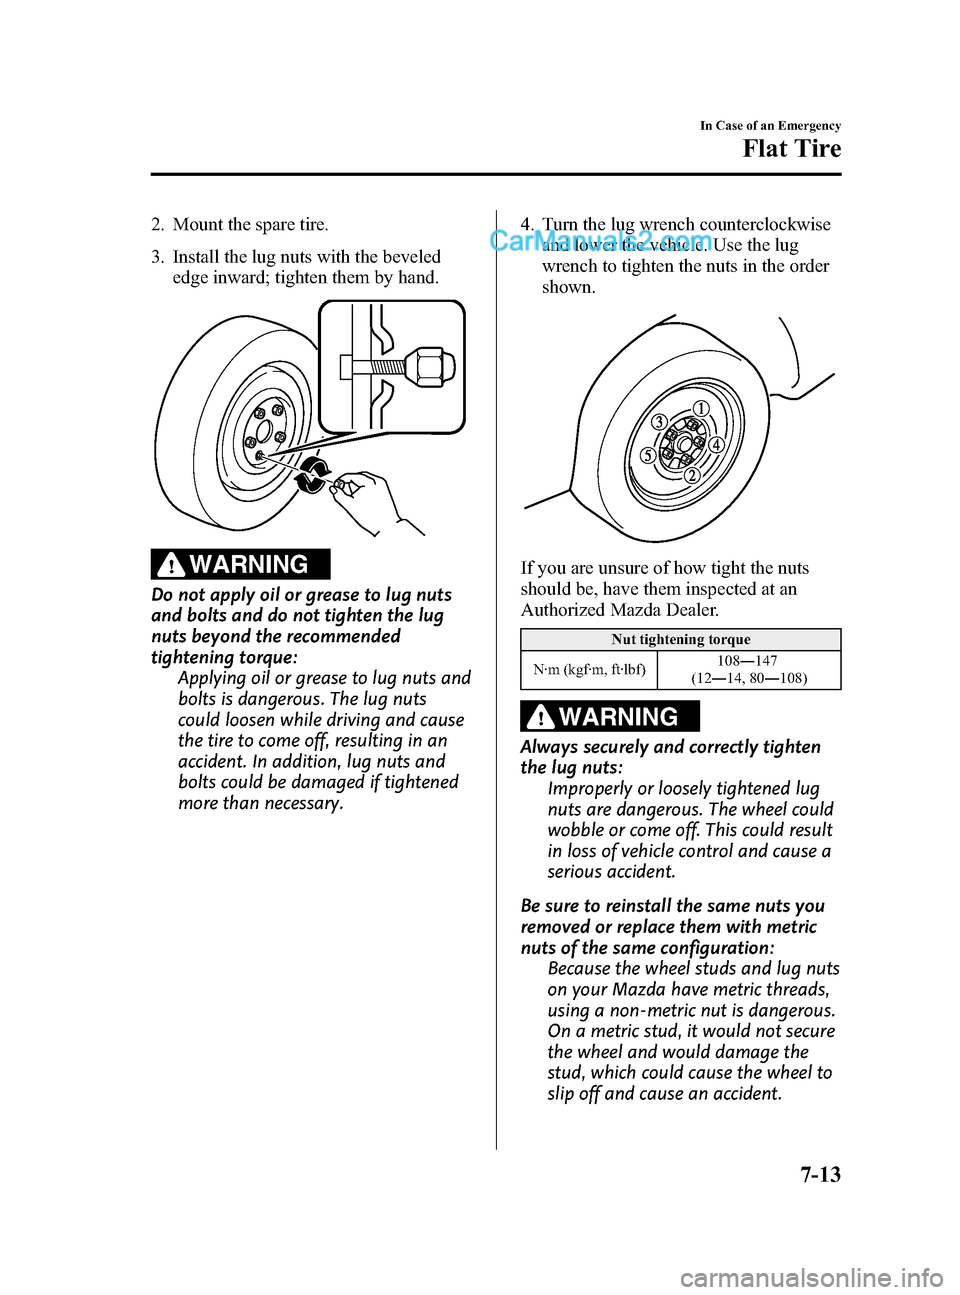 MAZDA MODEL CX-9 2015  Owners Manual (in English) Black plate (465,1)
2. Mount the spare tire.
3. Install the lug nuts with the bevelededge inward; tighten them by hand.
WARNING
Do not apply oil or grease to lug nuts
and bolts and do not tighten the 